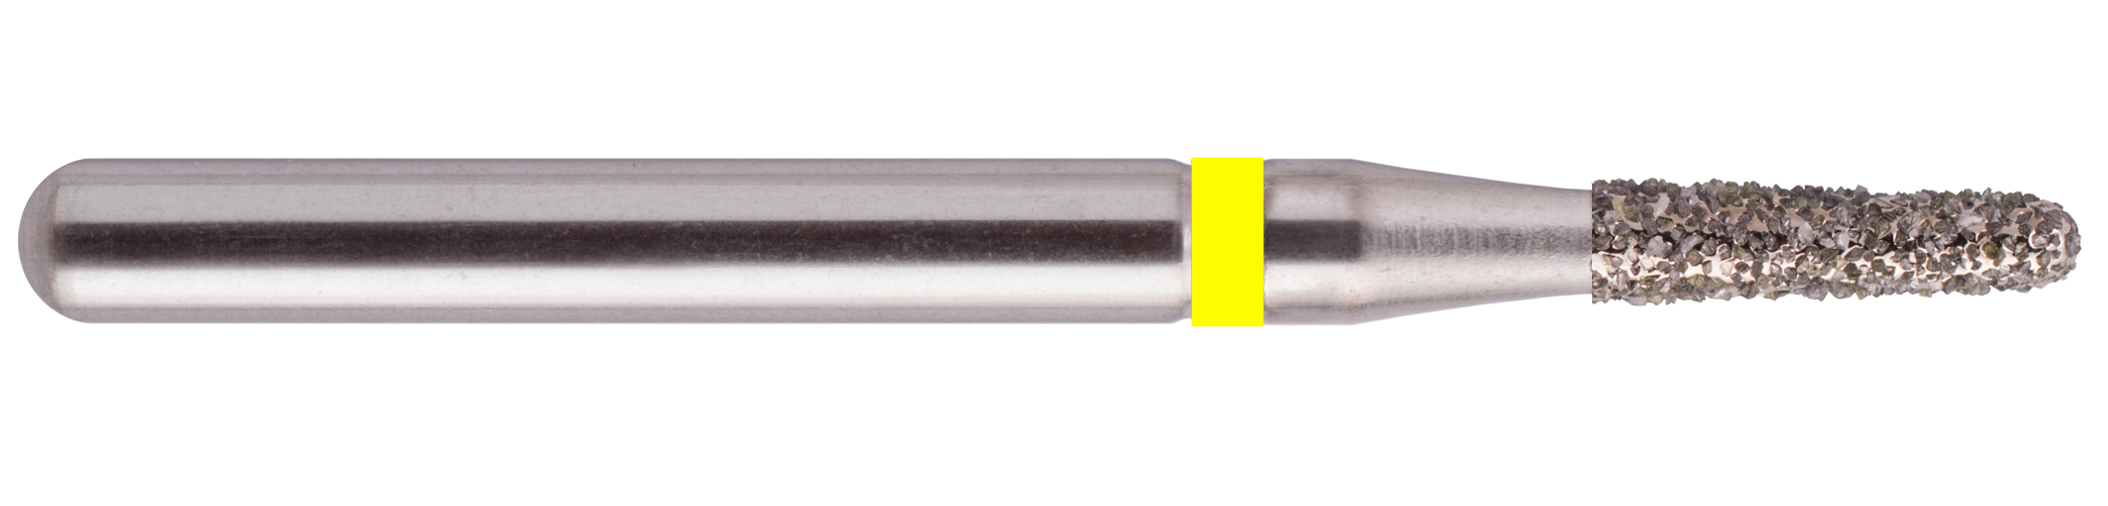 849 - Cone with rounded end